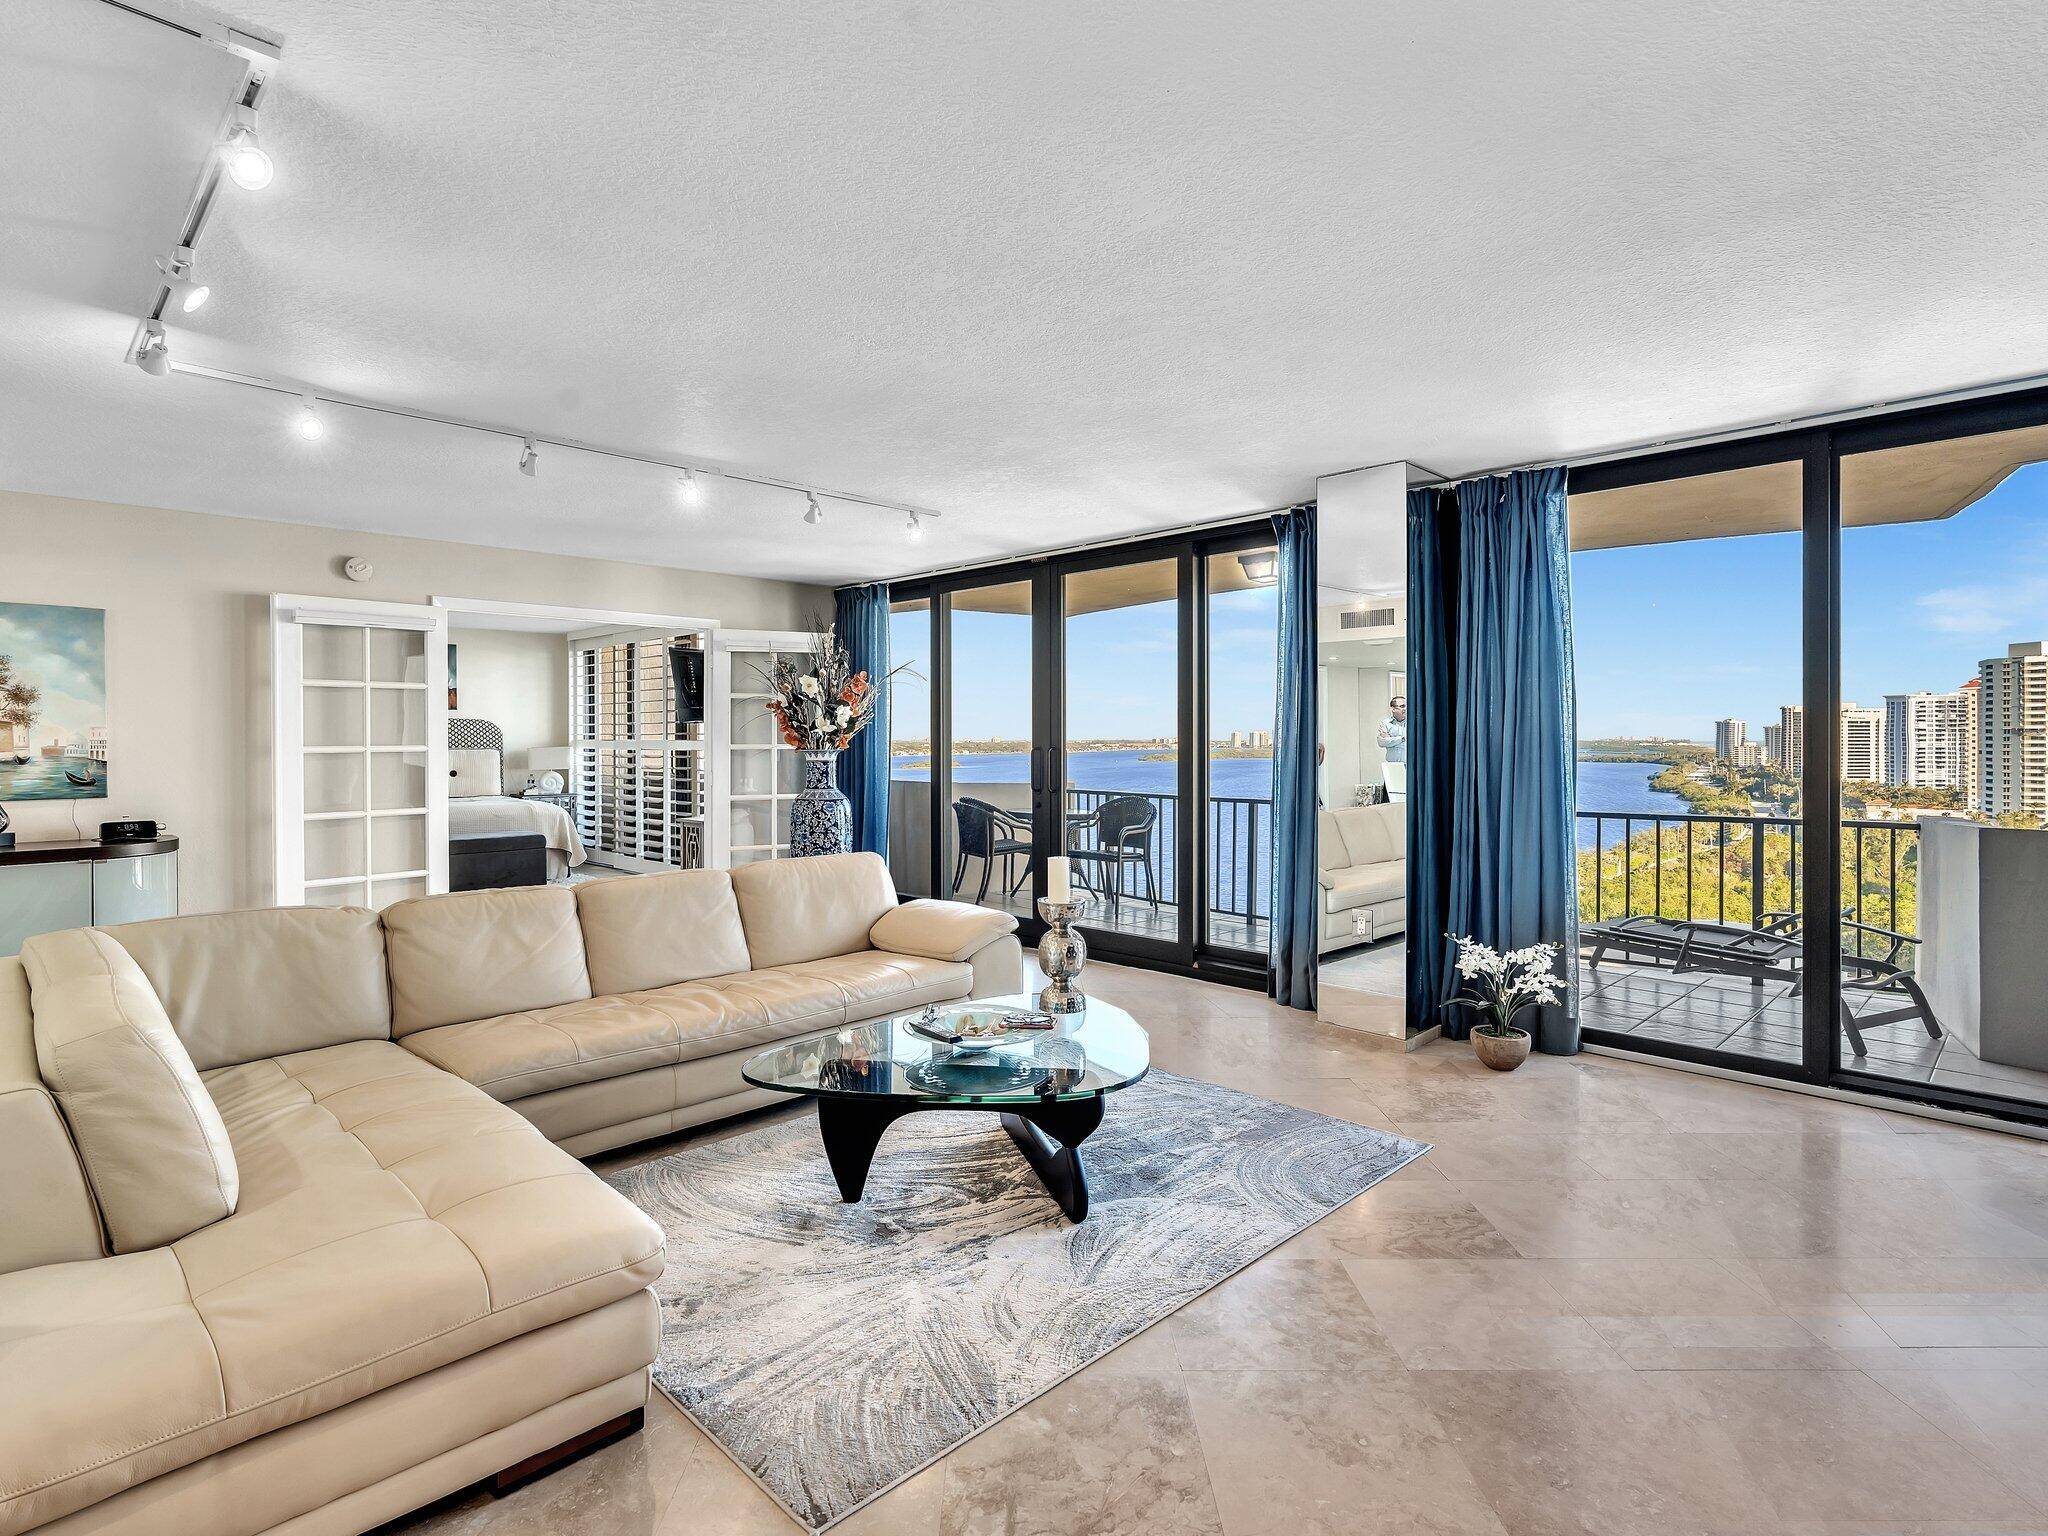 Seller Motivated... Singer Island Gorgeous High Floor 2 Bed 2 Bath Apartment with Panoramic Views of the Intercoastal Ocean.